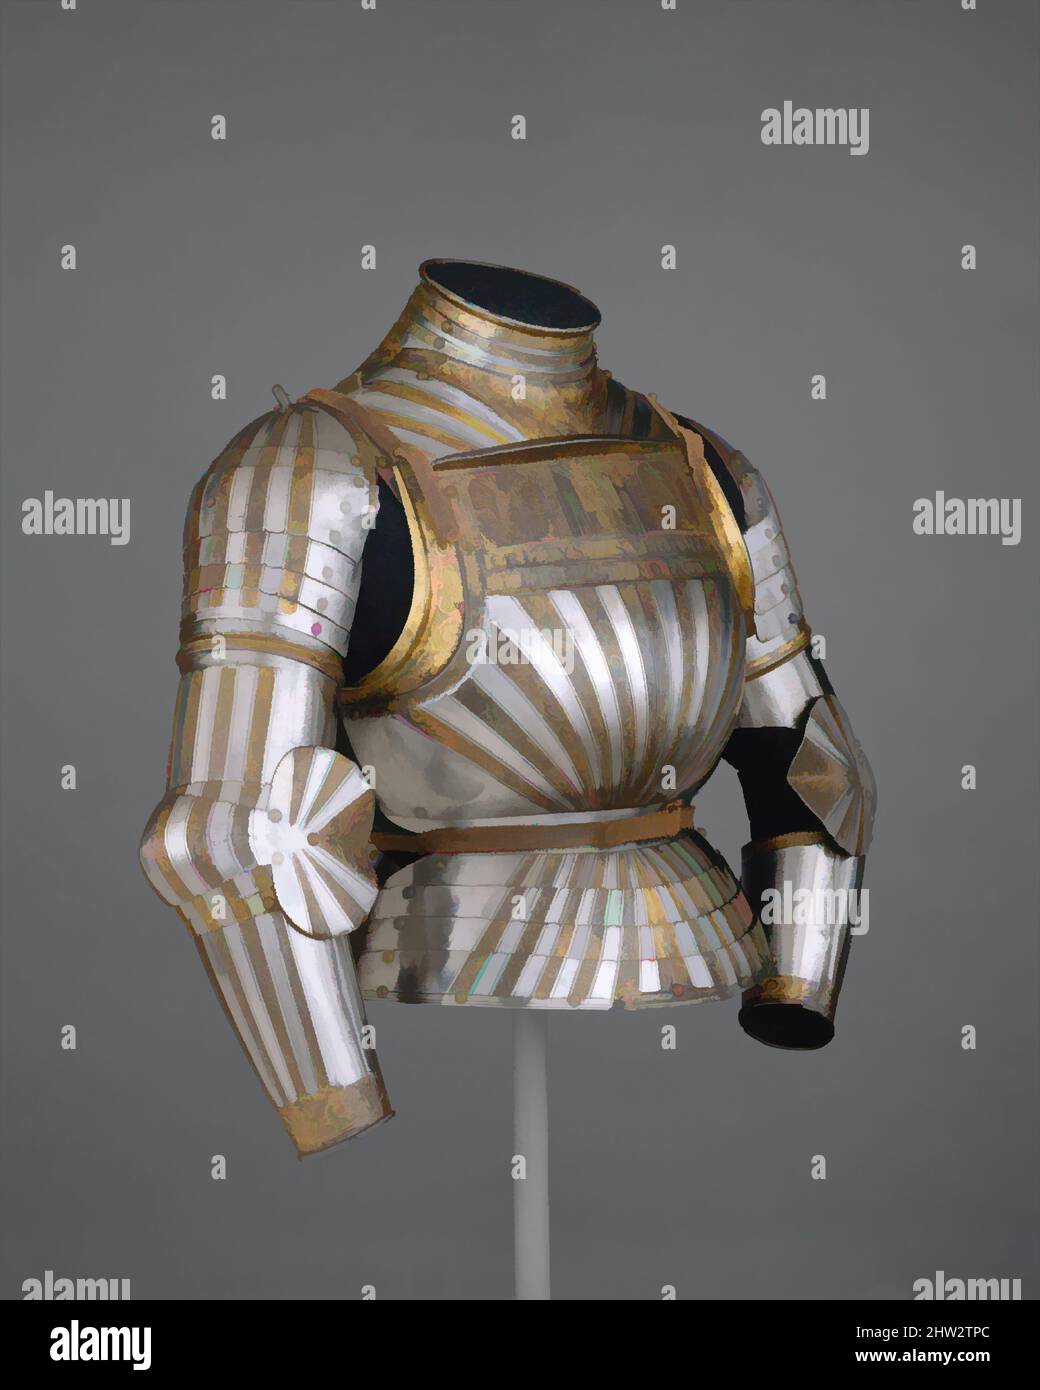 Art inspired by Elements of a Light-Cavalry Armor, ca. 1510, Milan, Italian, Milan, Steel, gold, copper alloy, Wt. 19 lb. 13 oz. (8987 g), Armor for Man-1/2 Armor, This is a rare example of Italian armor decorated with fluted surfaces in the German fashion. Its etched and richly gilt, Classic works modernized by Artotop with a splash of modernity. Shapes, color and value, eye-catching visual impact on art. Emotions through freedom of artworks in a contemporary way. A timeless message pursuing a wildly creative new direction. Artists turning to the digital medium and creating the Artotop NFT Stock Photo